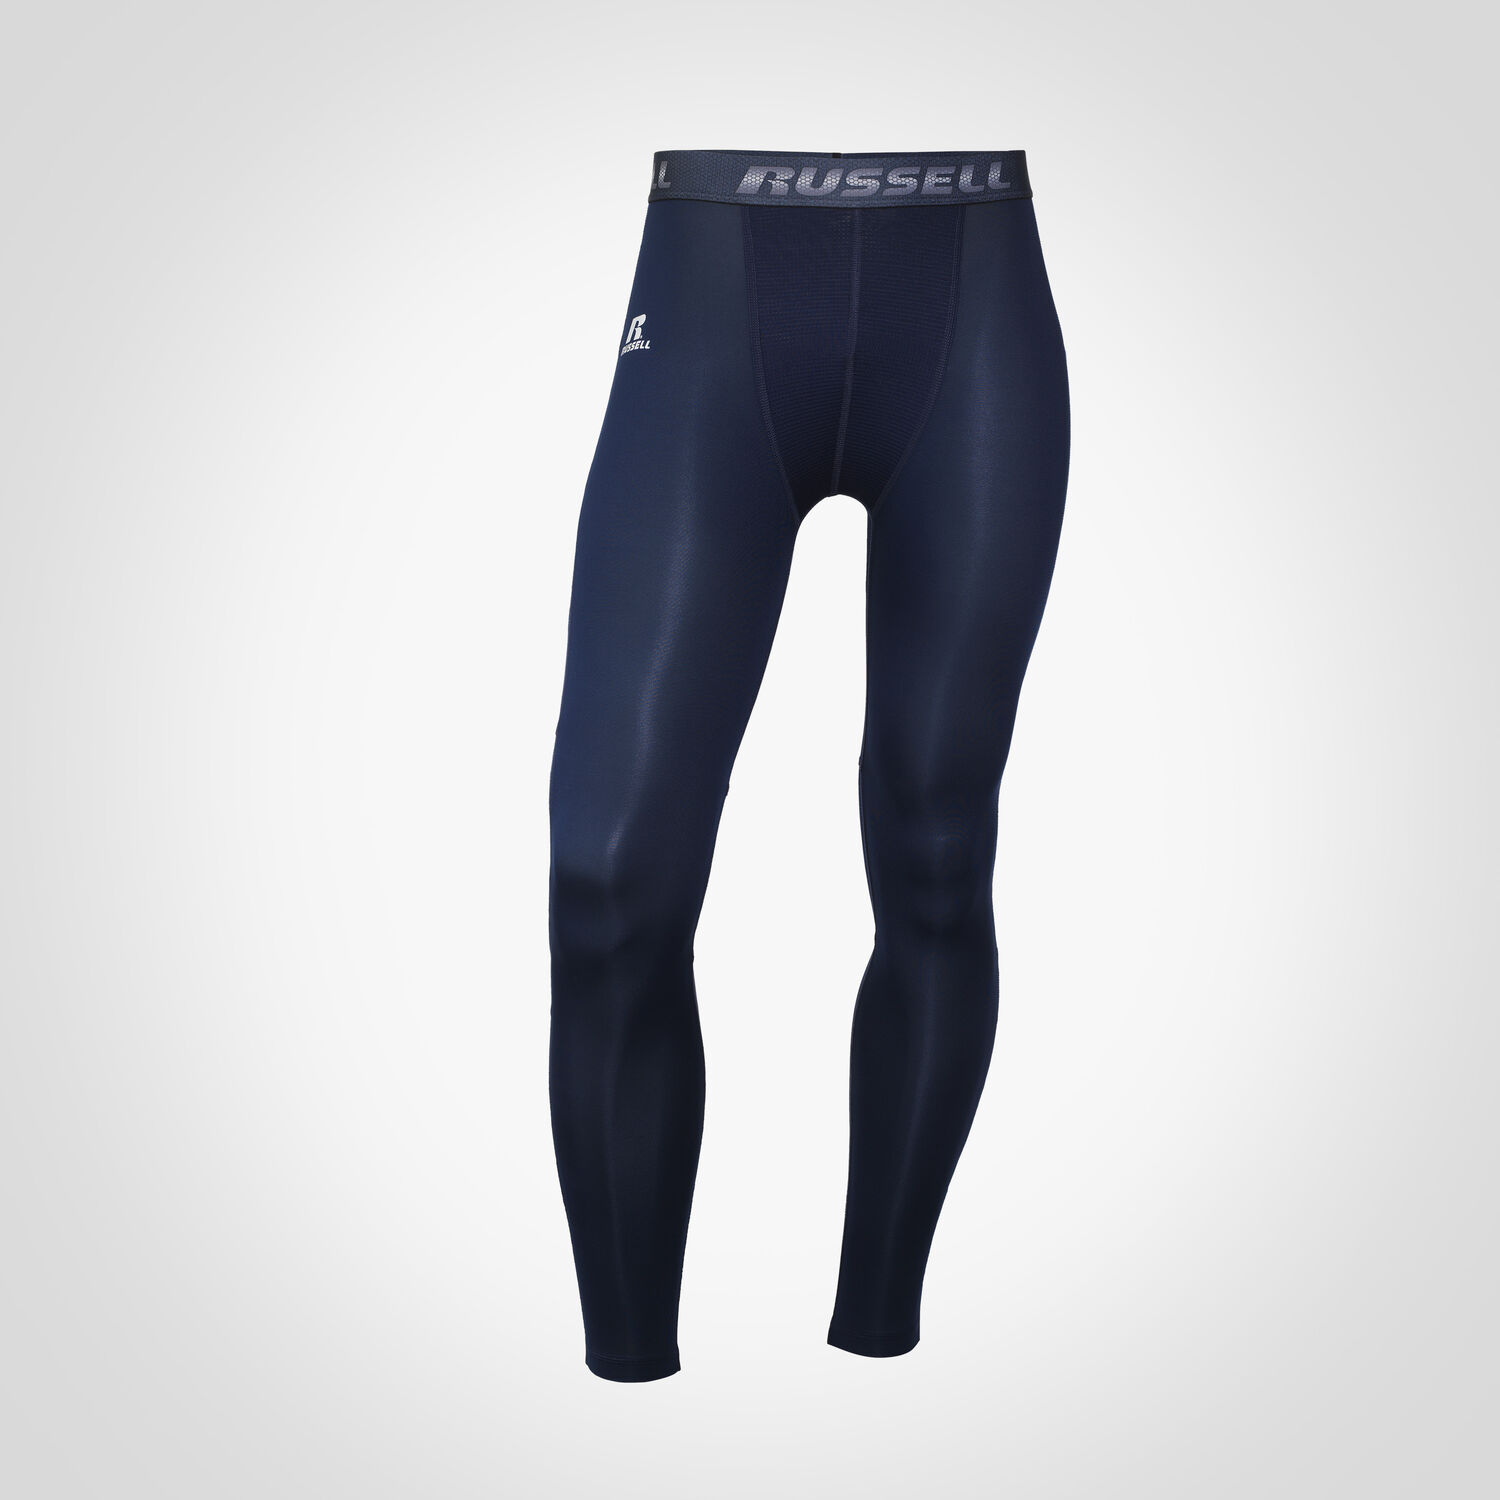 Russell Athletic Black Active Pants, Tights & Leggings